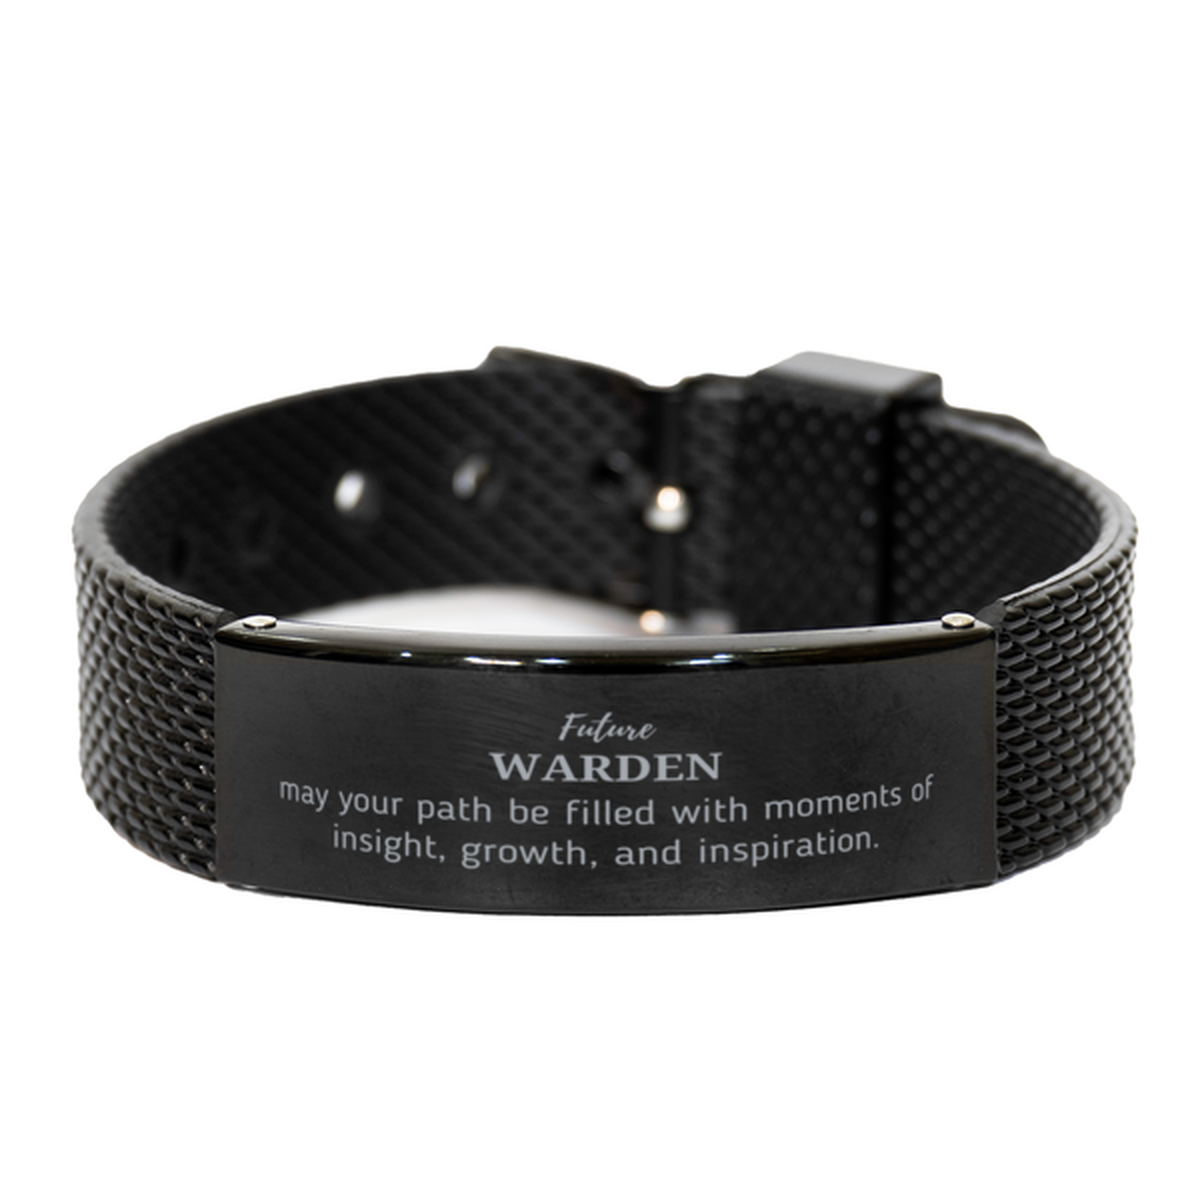 Future Warden Gifts, May your path be filled with moments of insight, Graduation Gifts for New Warden, Christmas Unique Black Shark Mesh Bracelet For Men, Women, Friends